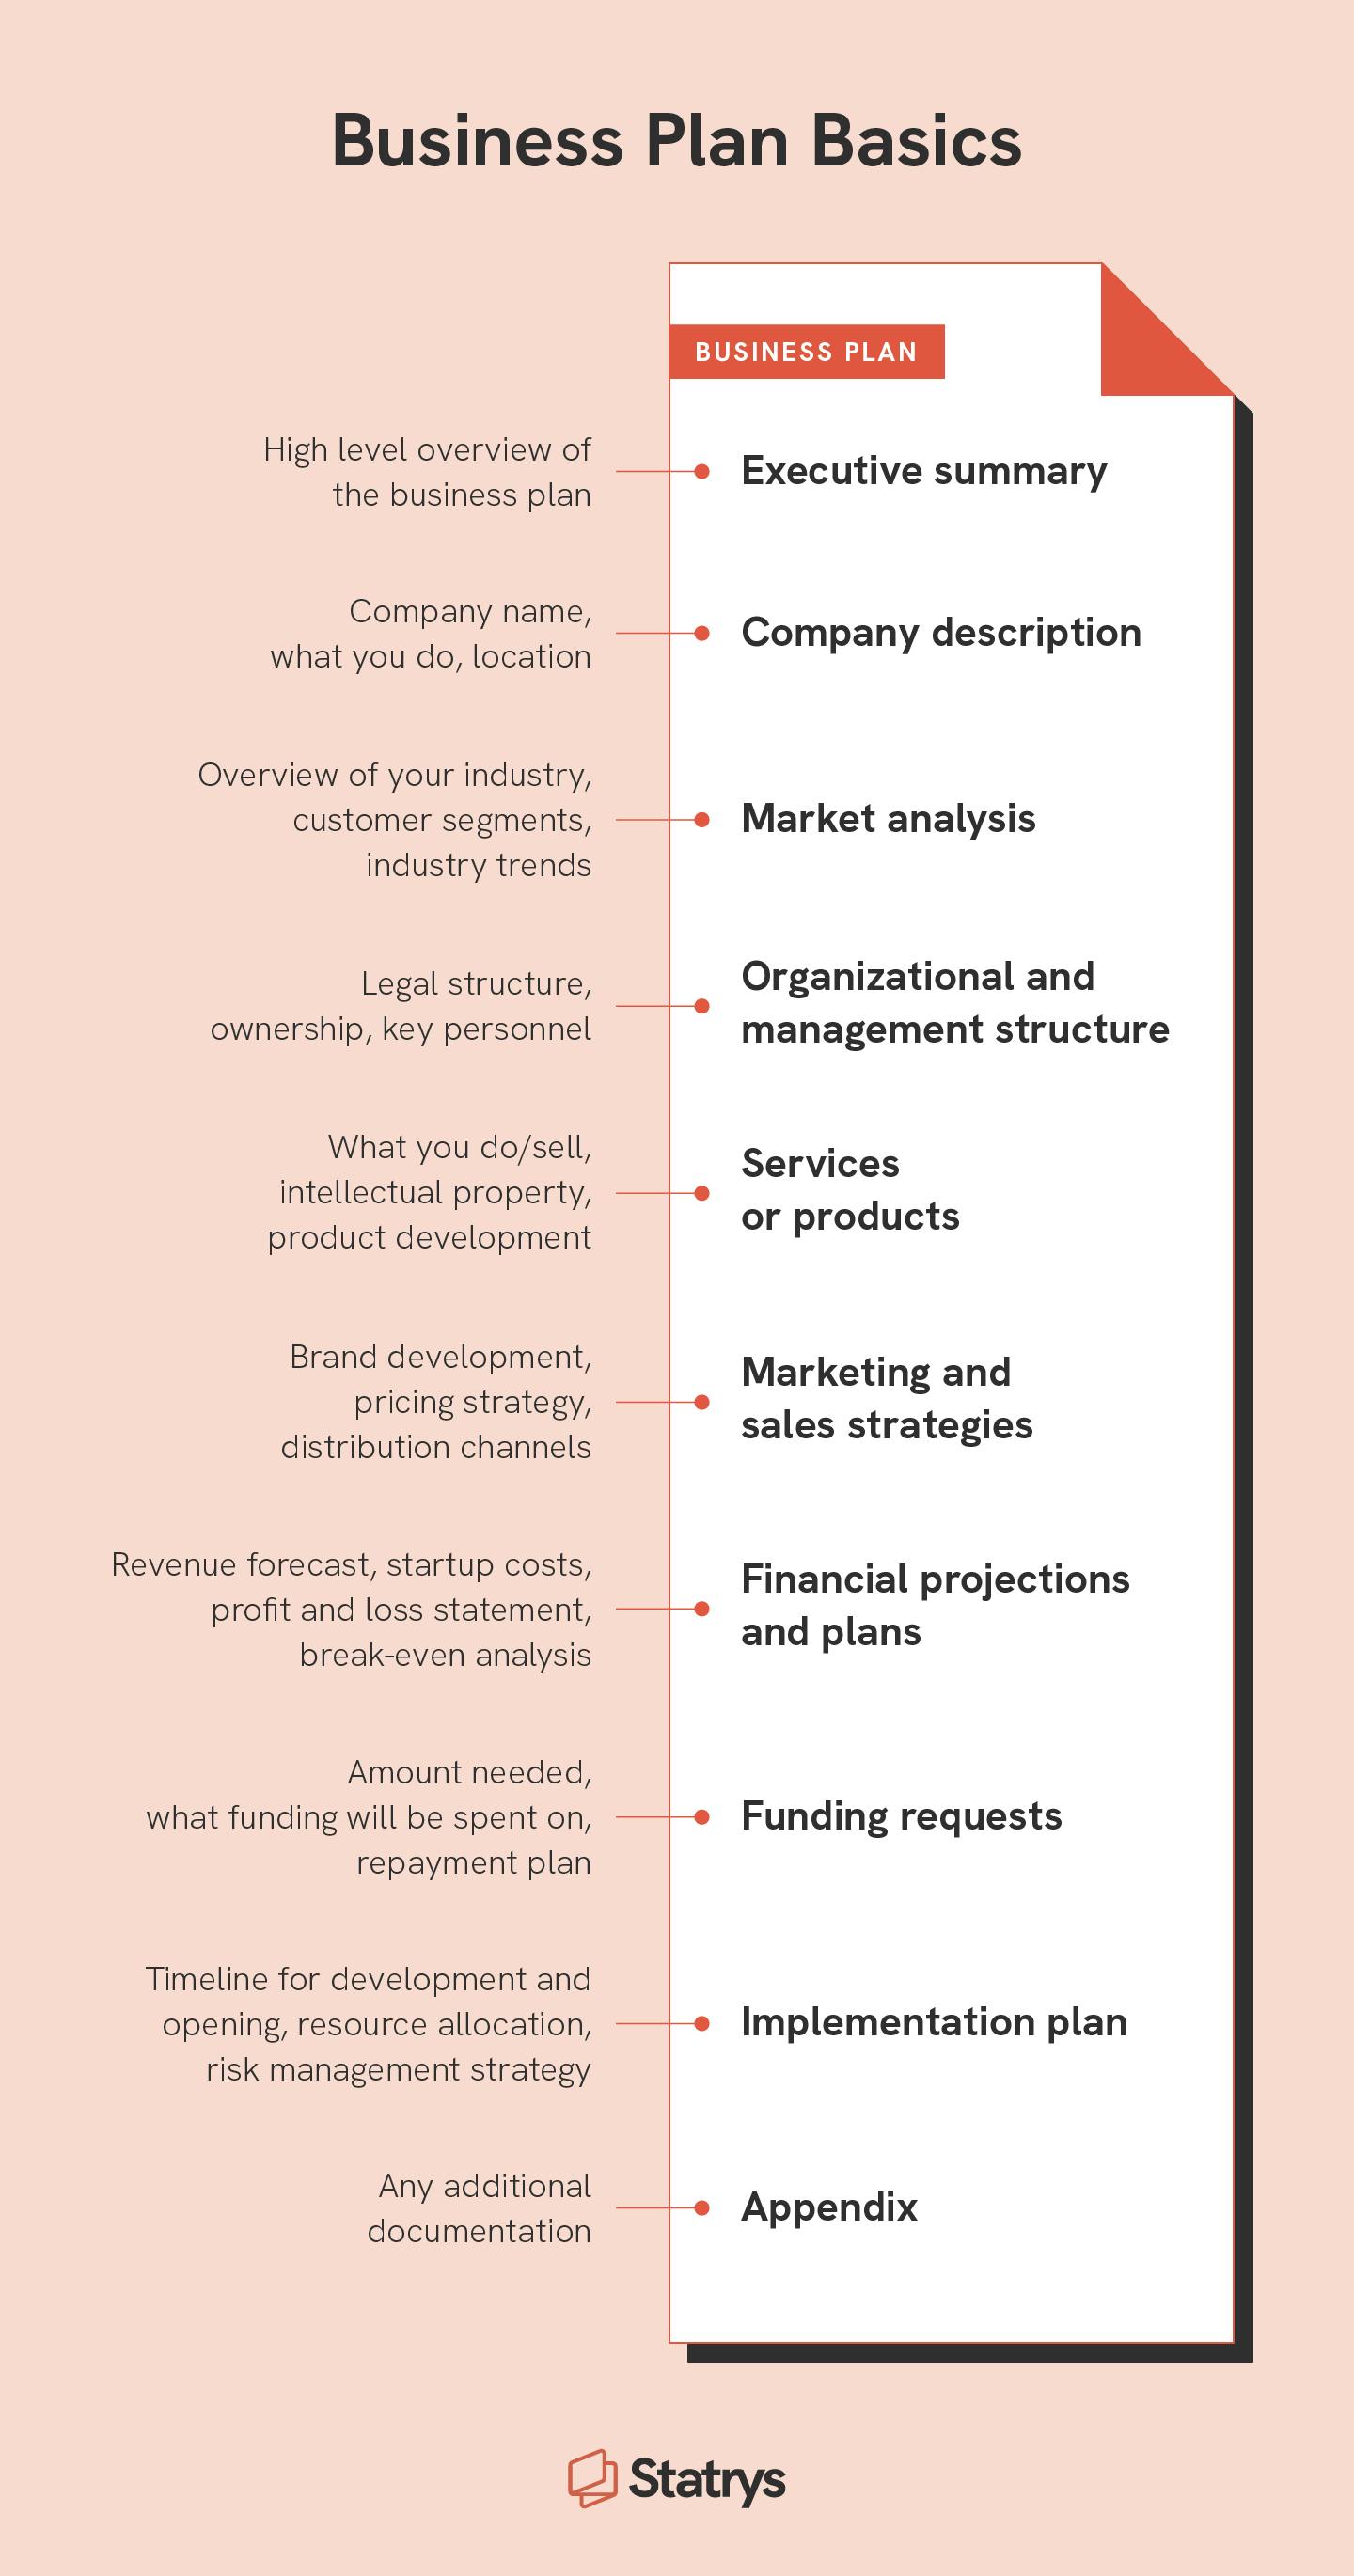 trends in the industry business plan example